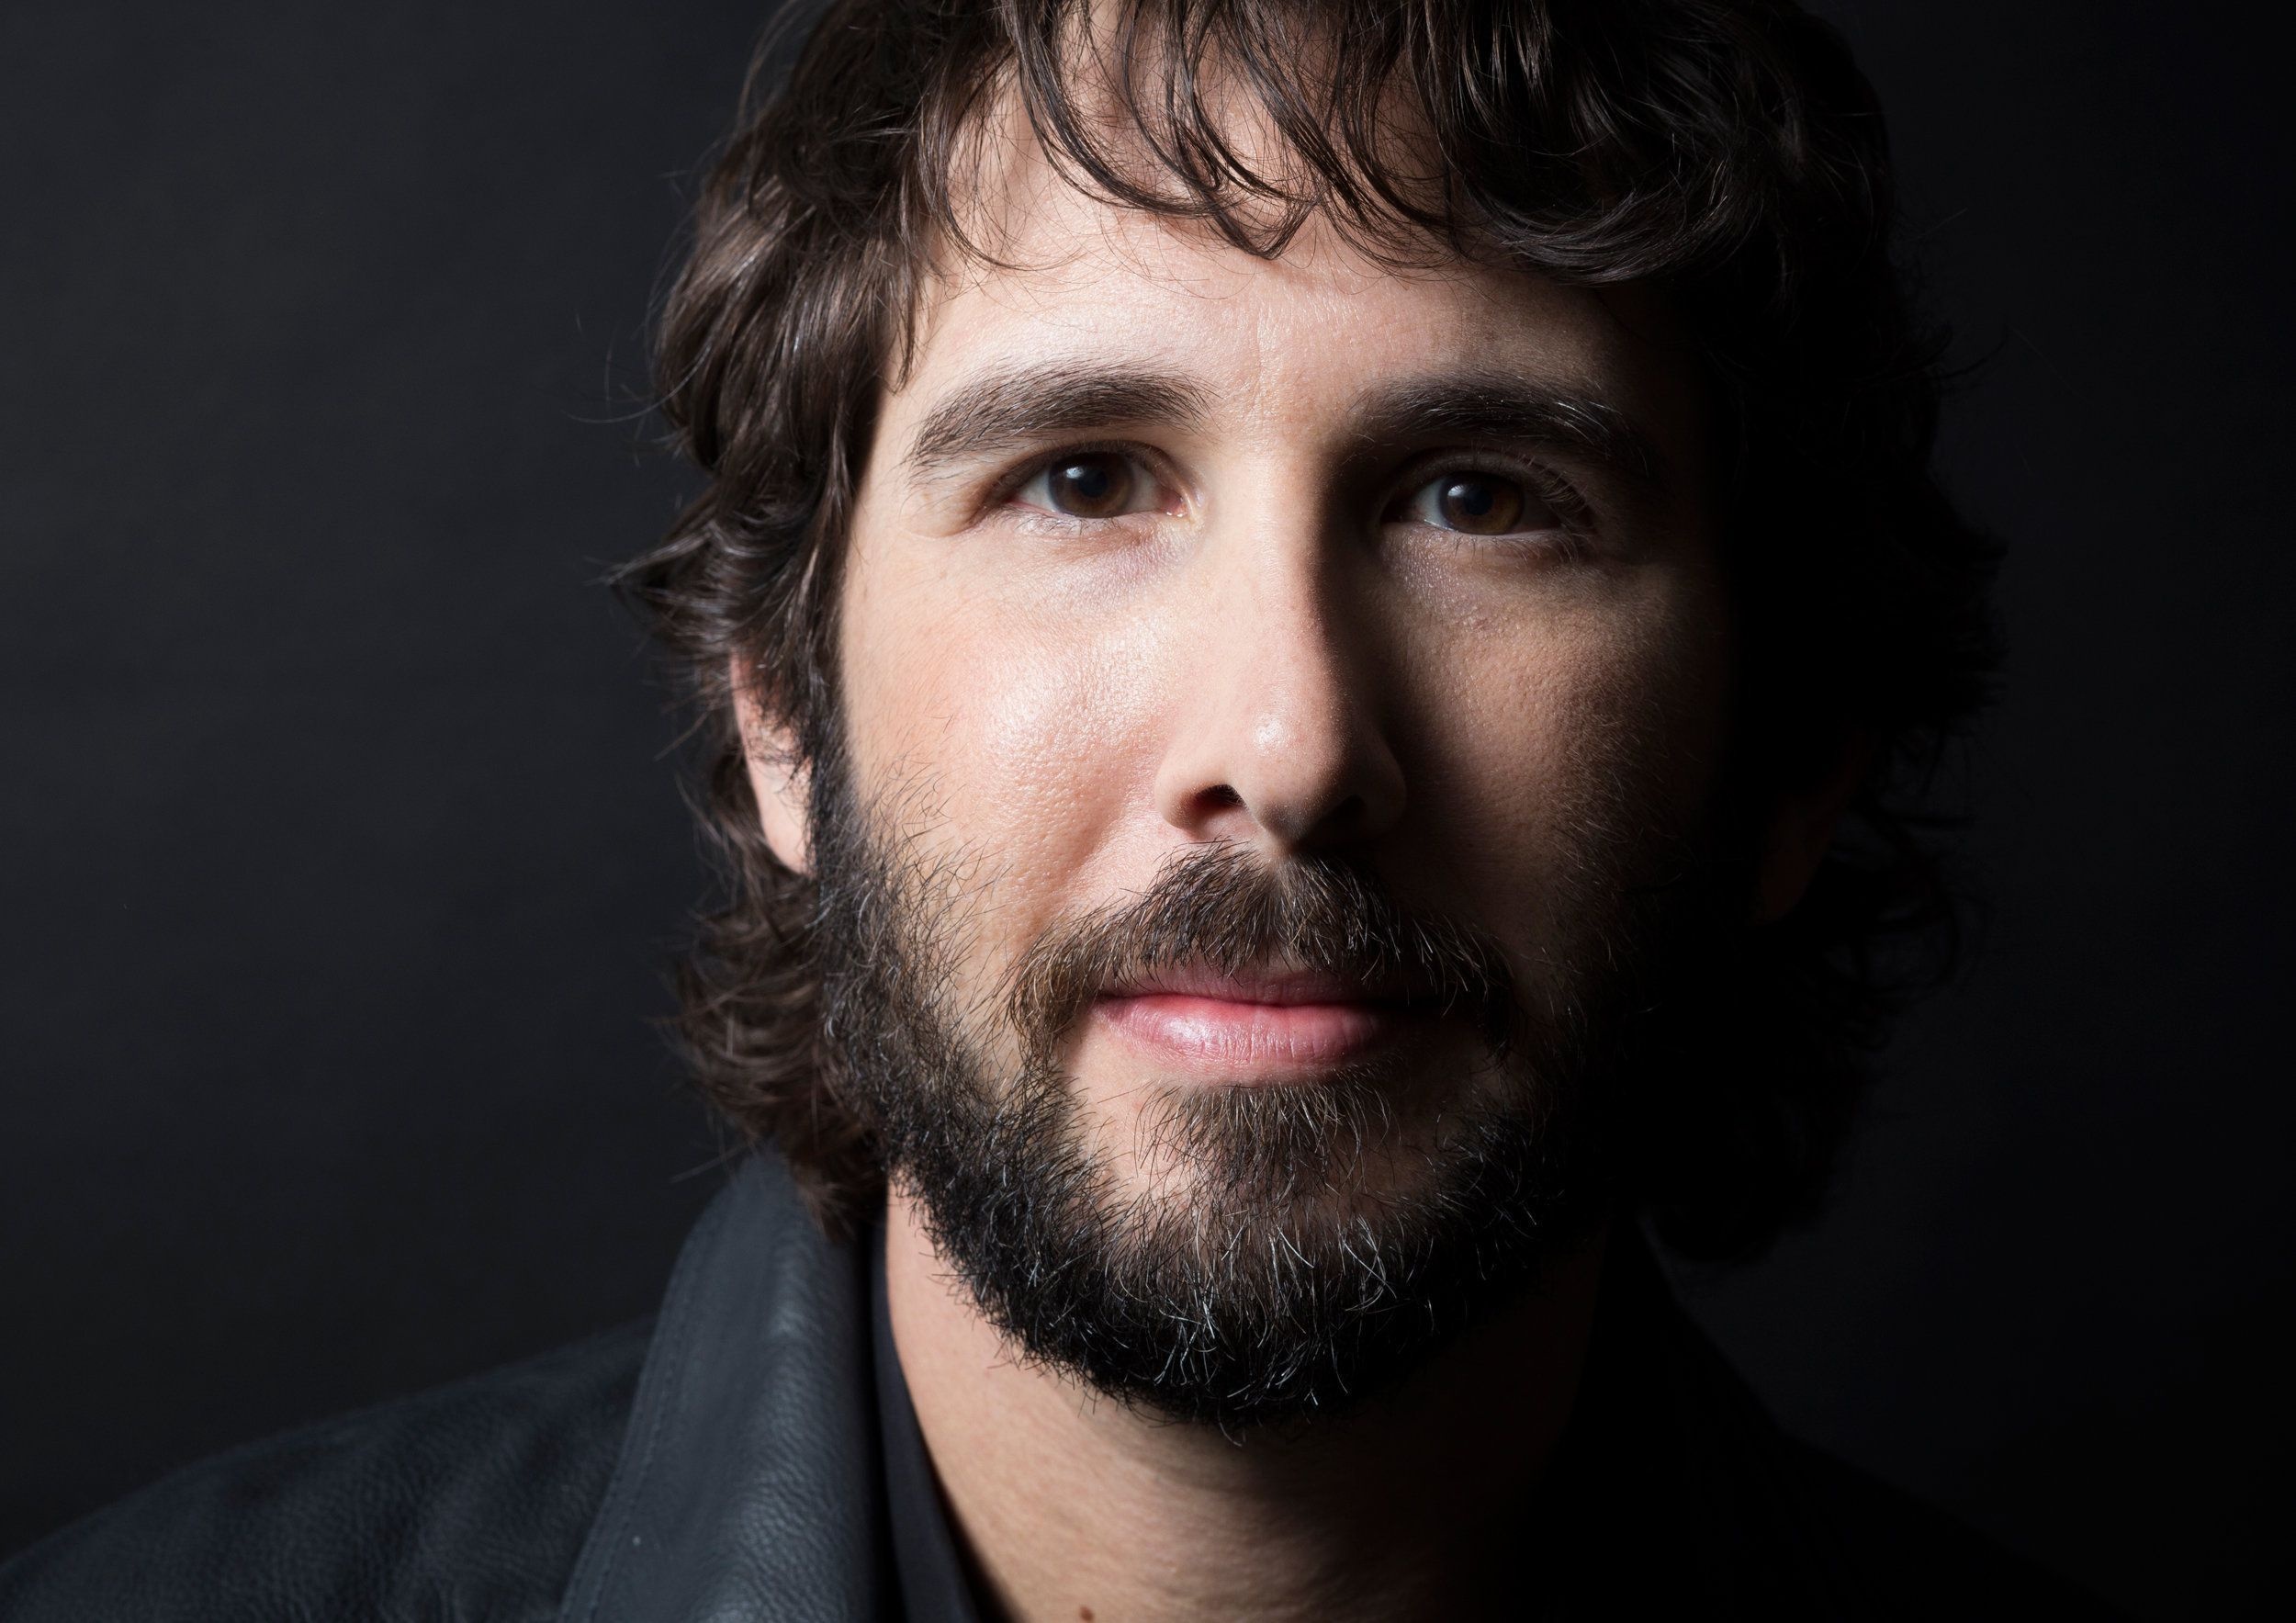 Josh Groban Wallpapers posted by Ethan Johnson 2500x1770